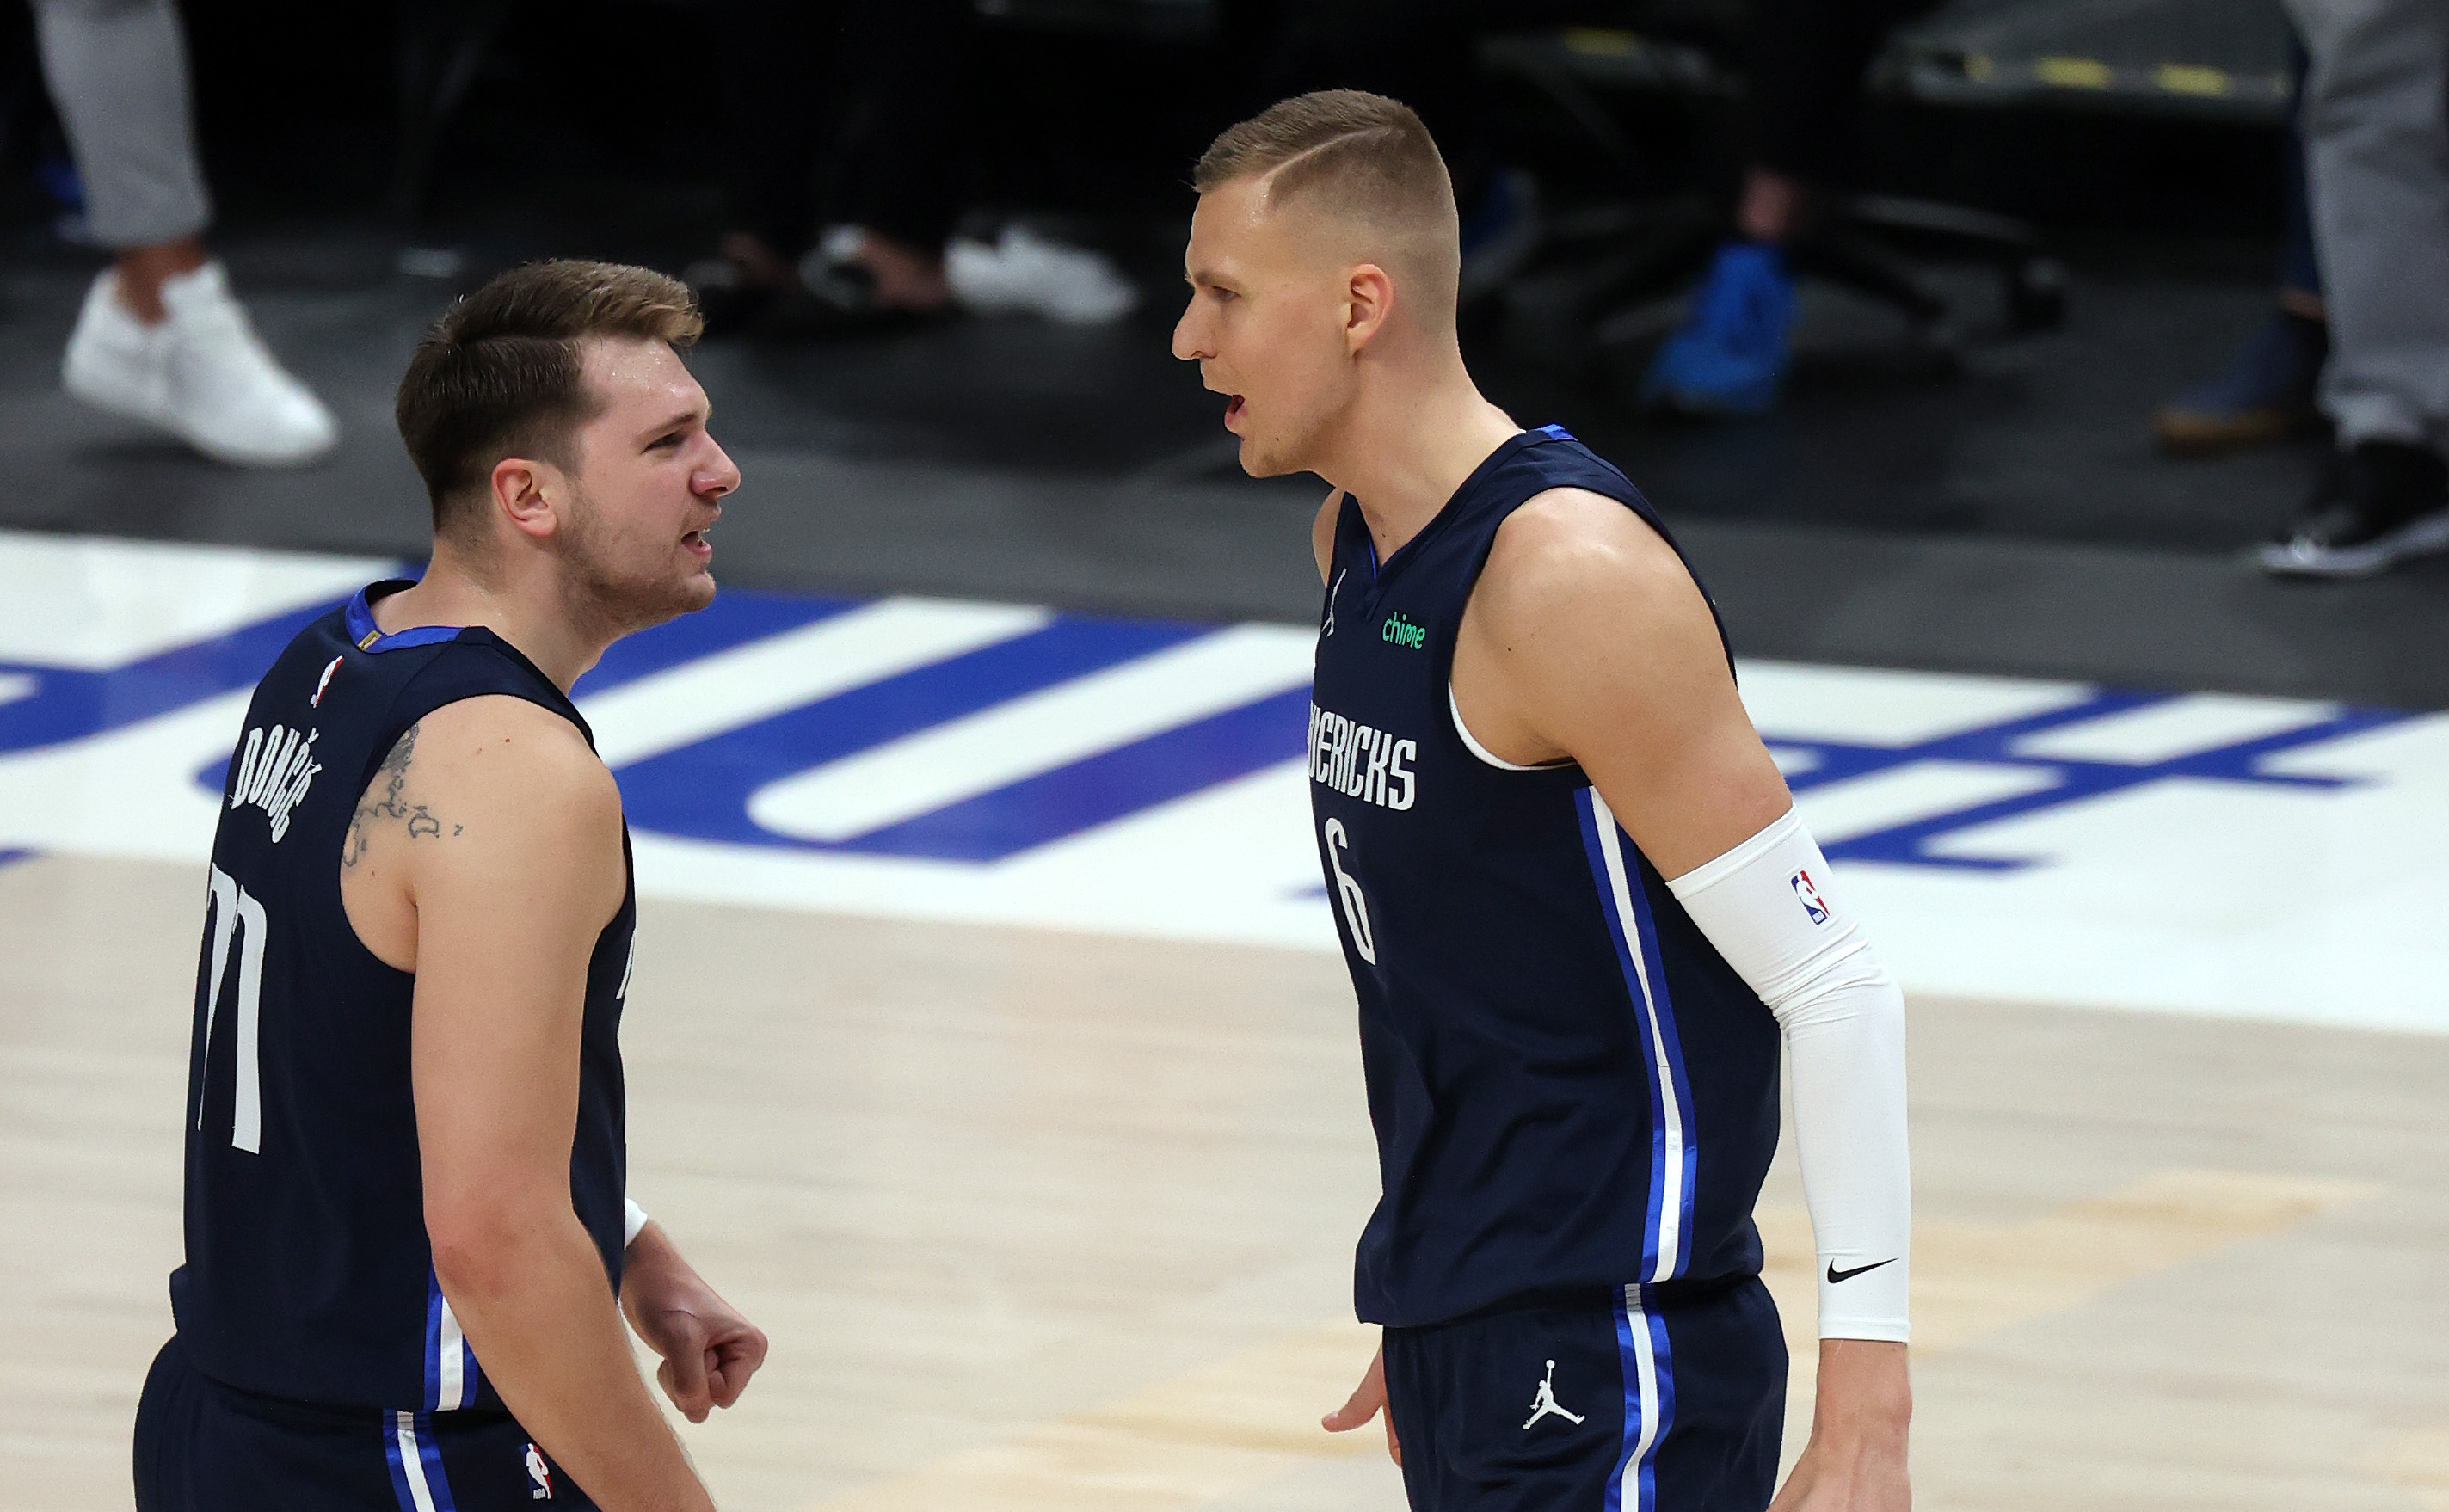 Stacey King claims Luka Doncic reminds him of Michael Jordan